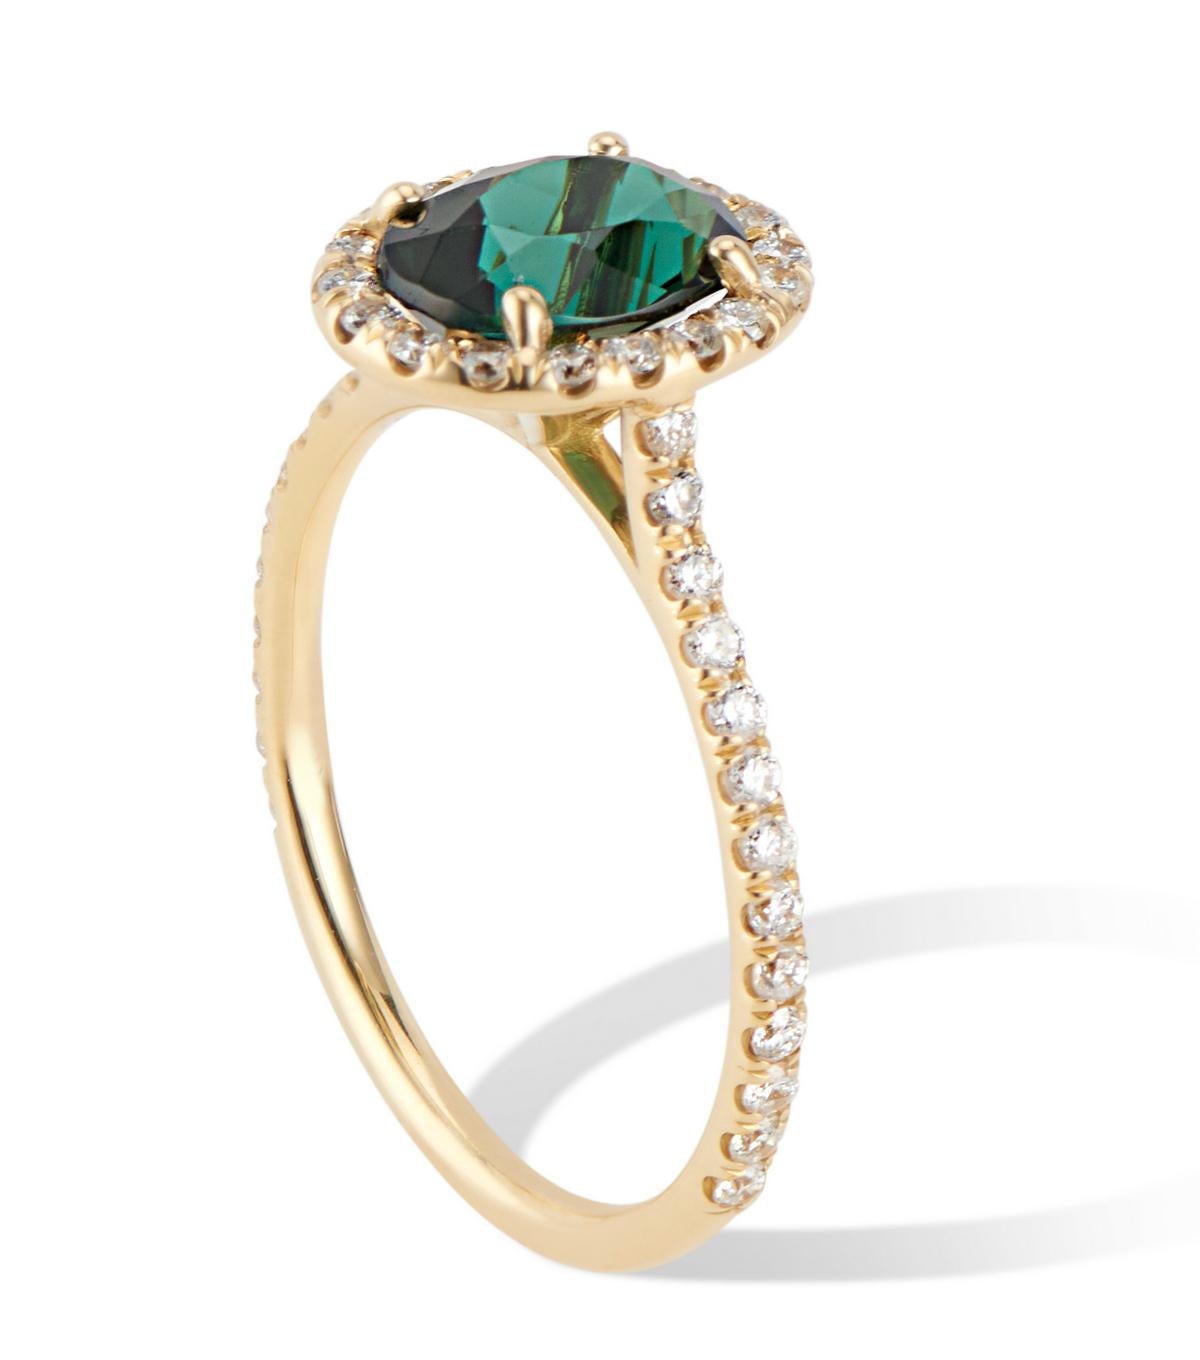 Contemporary 18 Karat Yellow Gold Green Tourmaline Ring with Diamond Halo For Sale